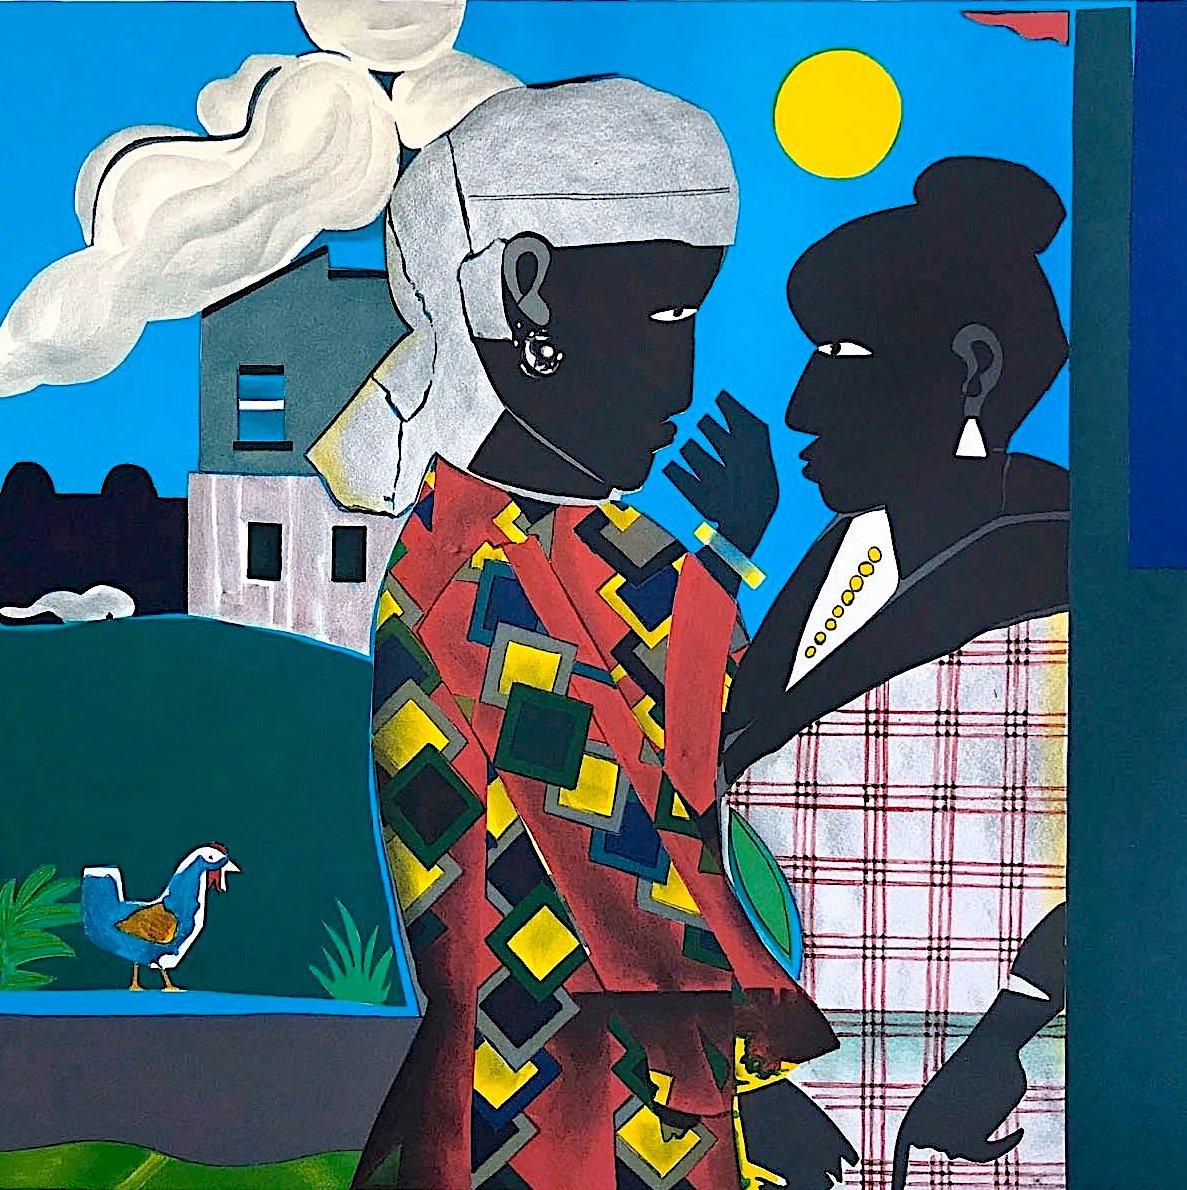 THE CONVERSATION Signed Lithograph, Black Women, Train, African American Culture - Print by Romare Bearden